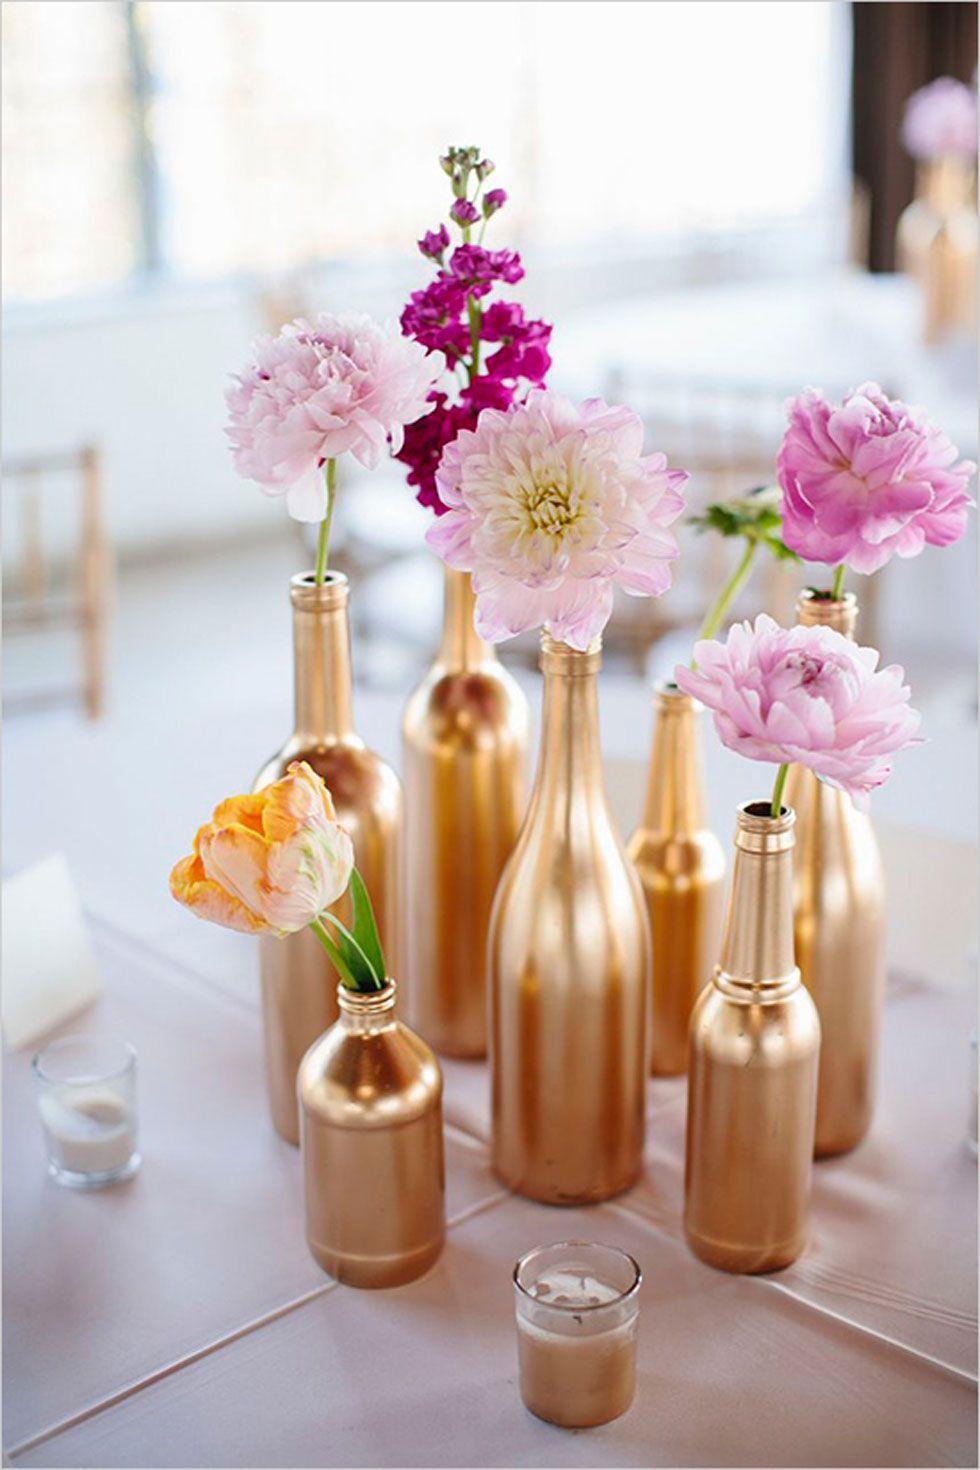 These spray-painted glass bottles look gorgeous as simple vases for individual blossoms.